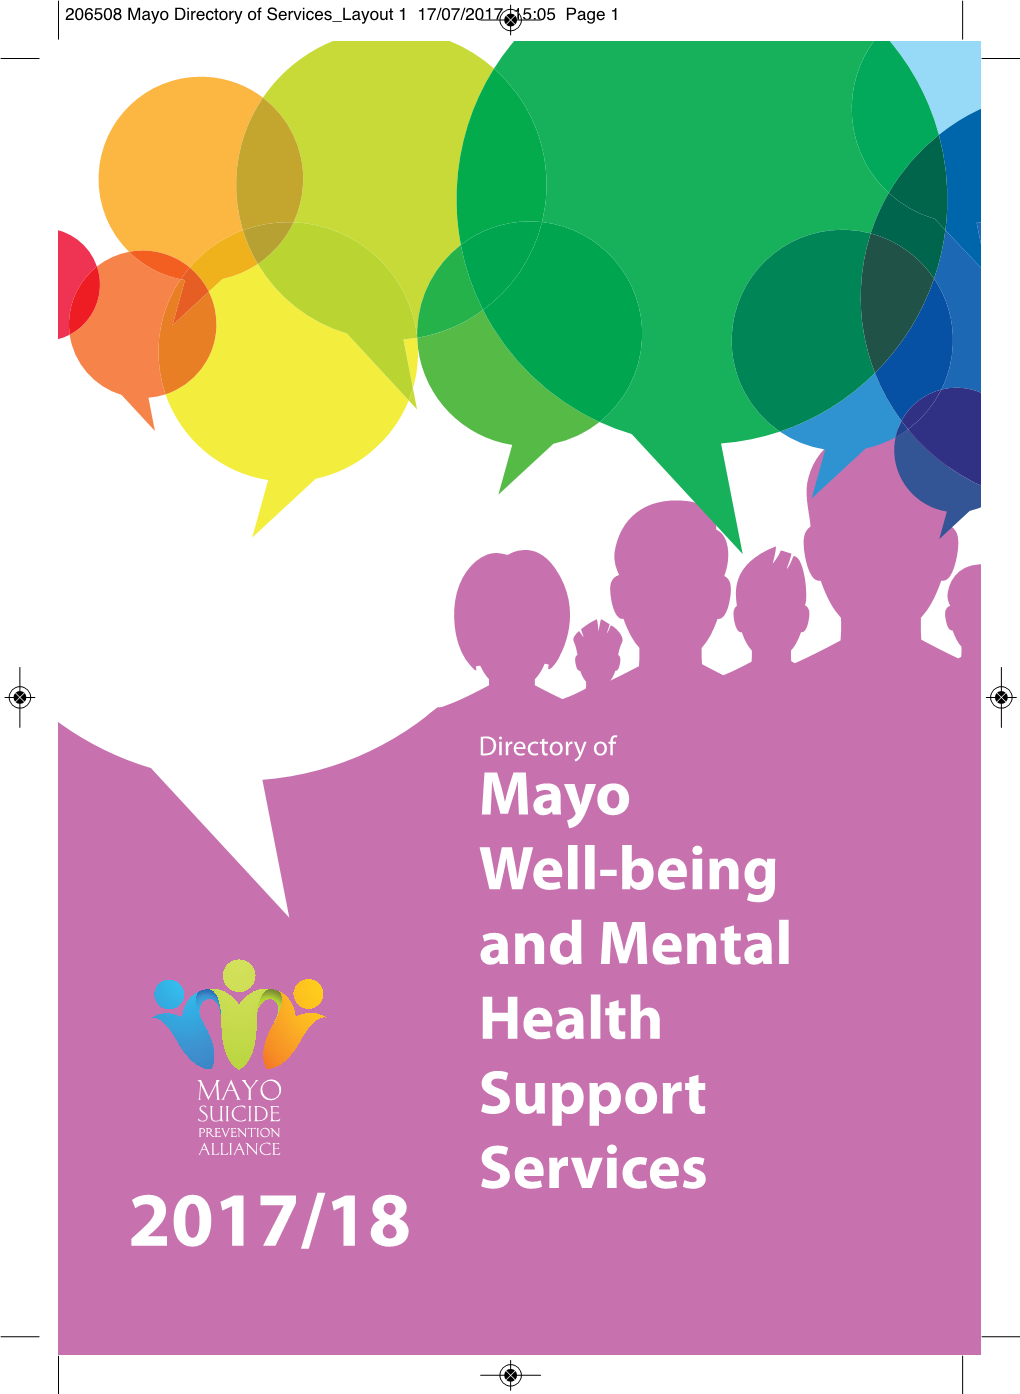 Mayo Well-Being and Mental Health Support Services 2017/18 206508 Mayo Directory of Services Layout 1 17/07/2017 15:05 Page 2